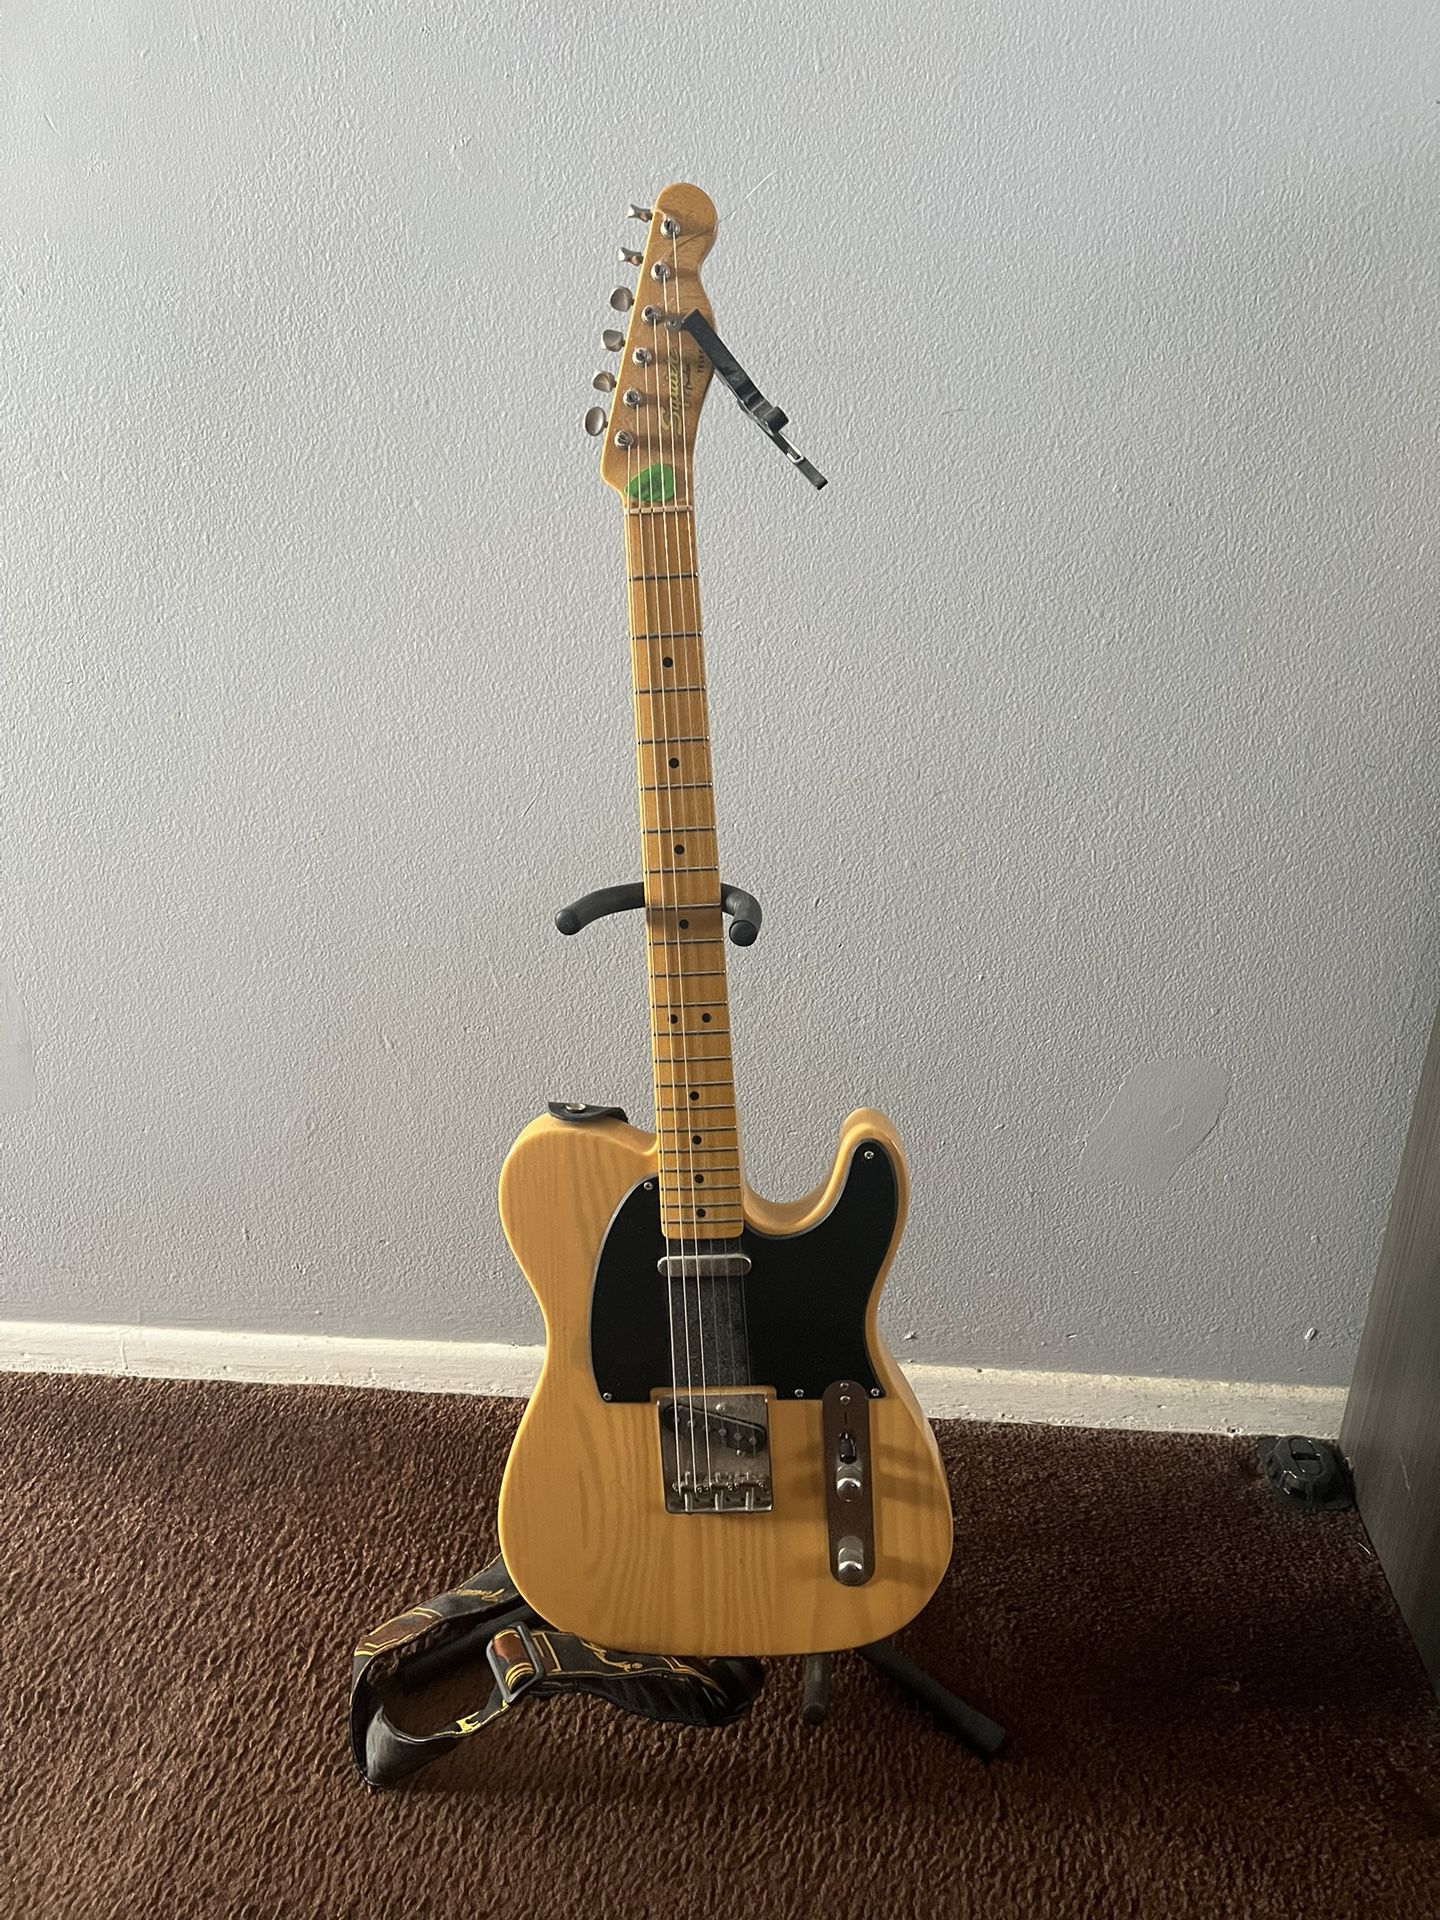 Fender Squire Classic Vibe Telecaster. And Brugera Tube Amp